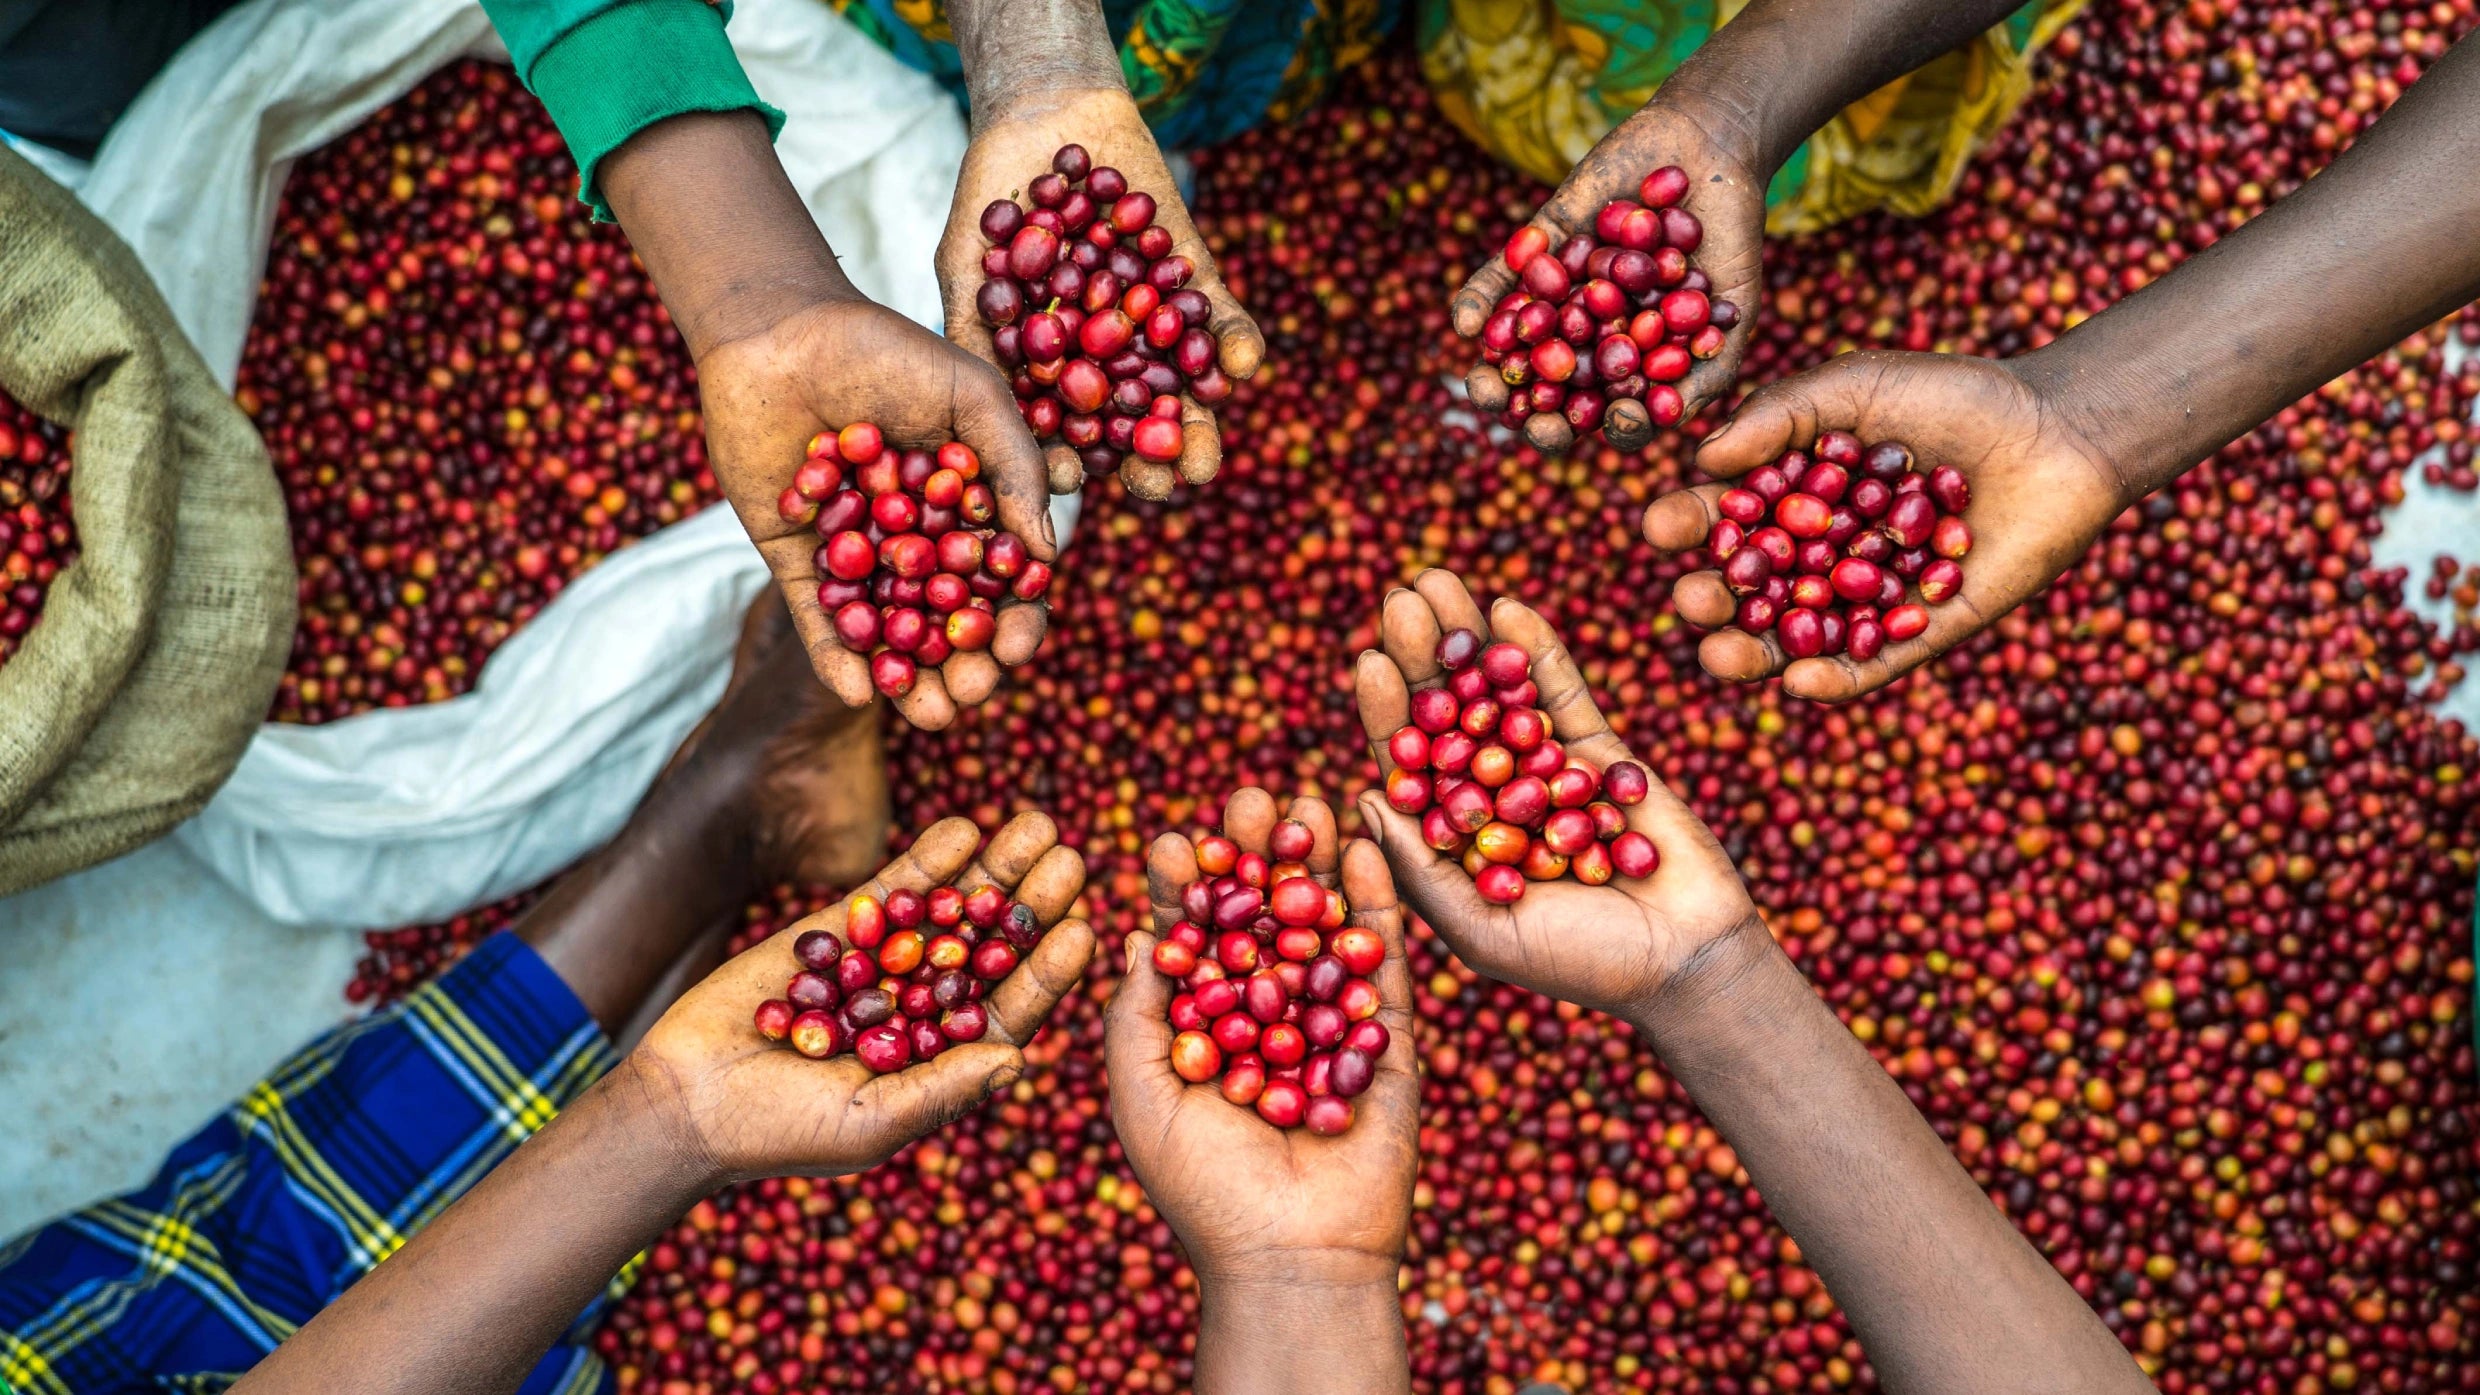 Several hands holding ripe red coffee cherries in Uganda